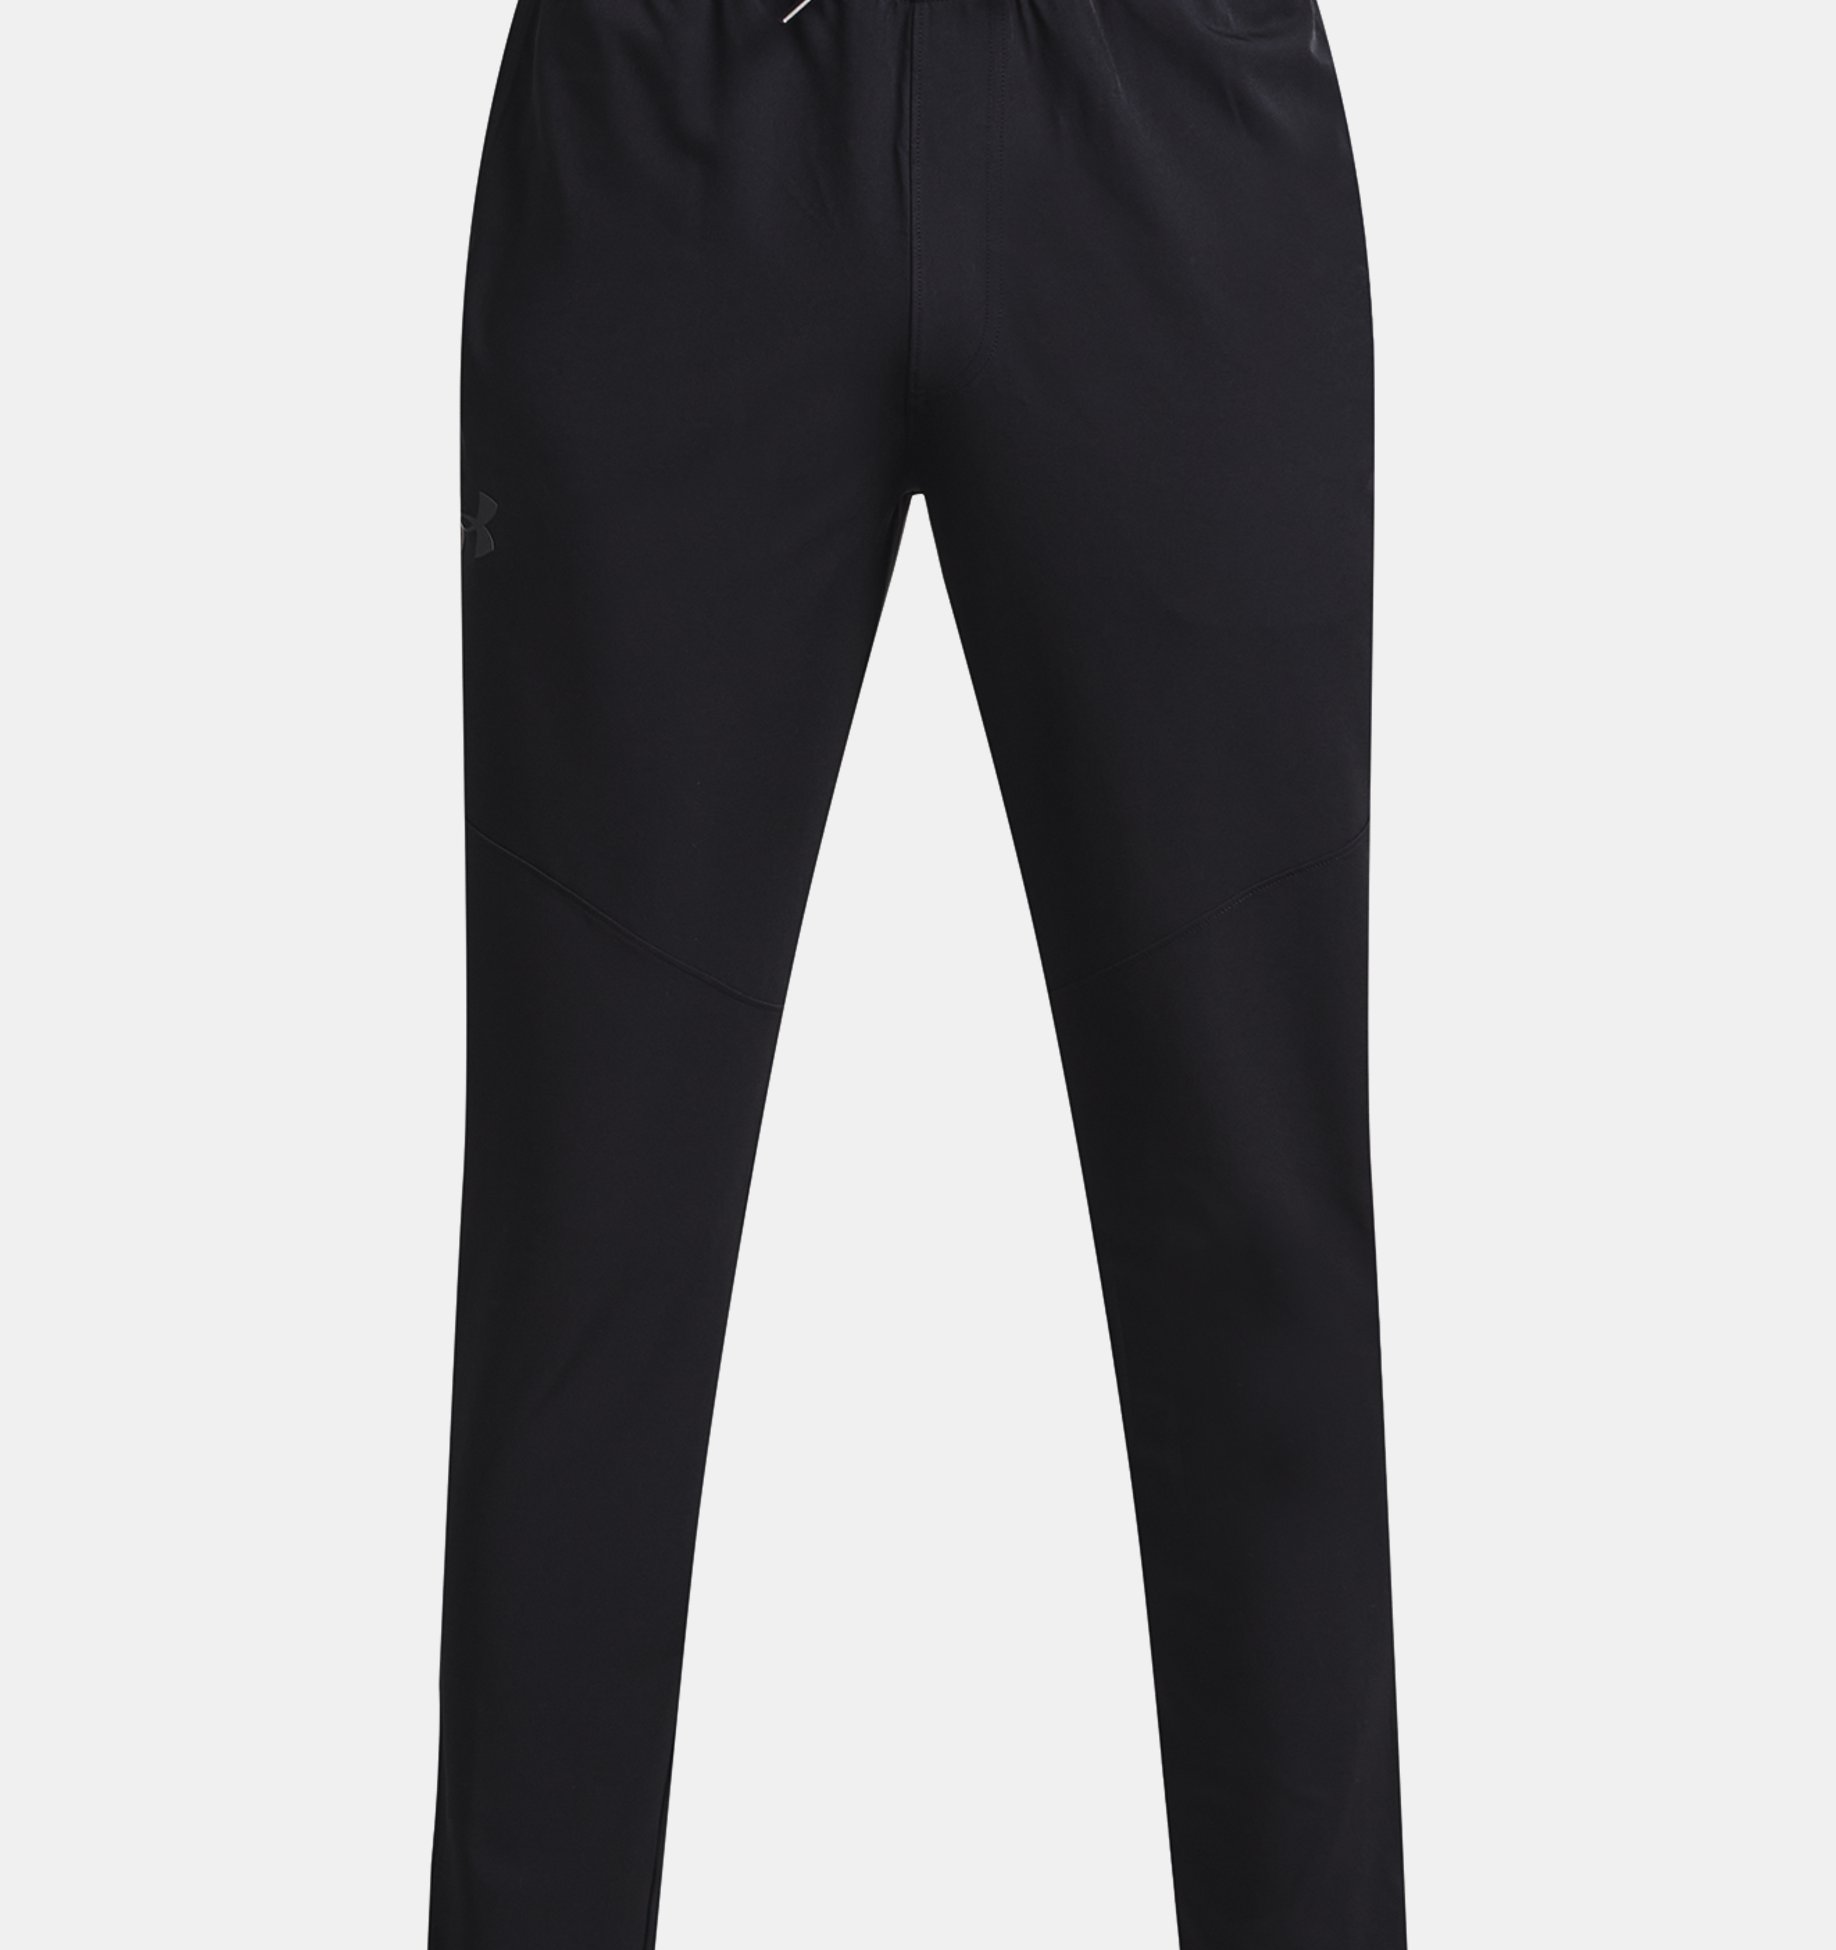 Men's UA Sportstyle Elite Tapered Pants | Under Armour